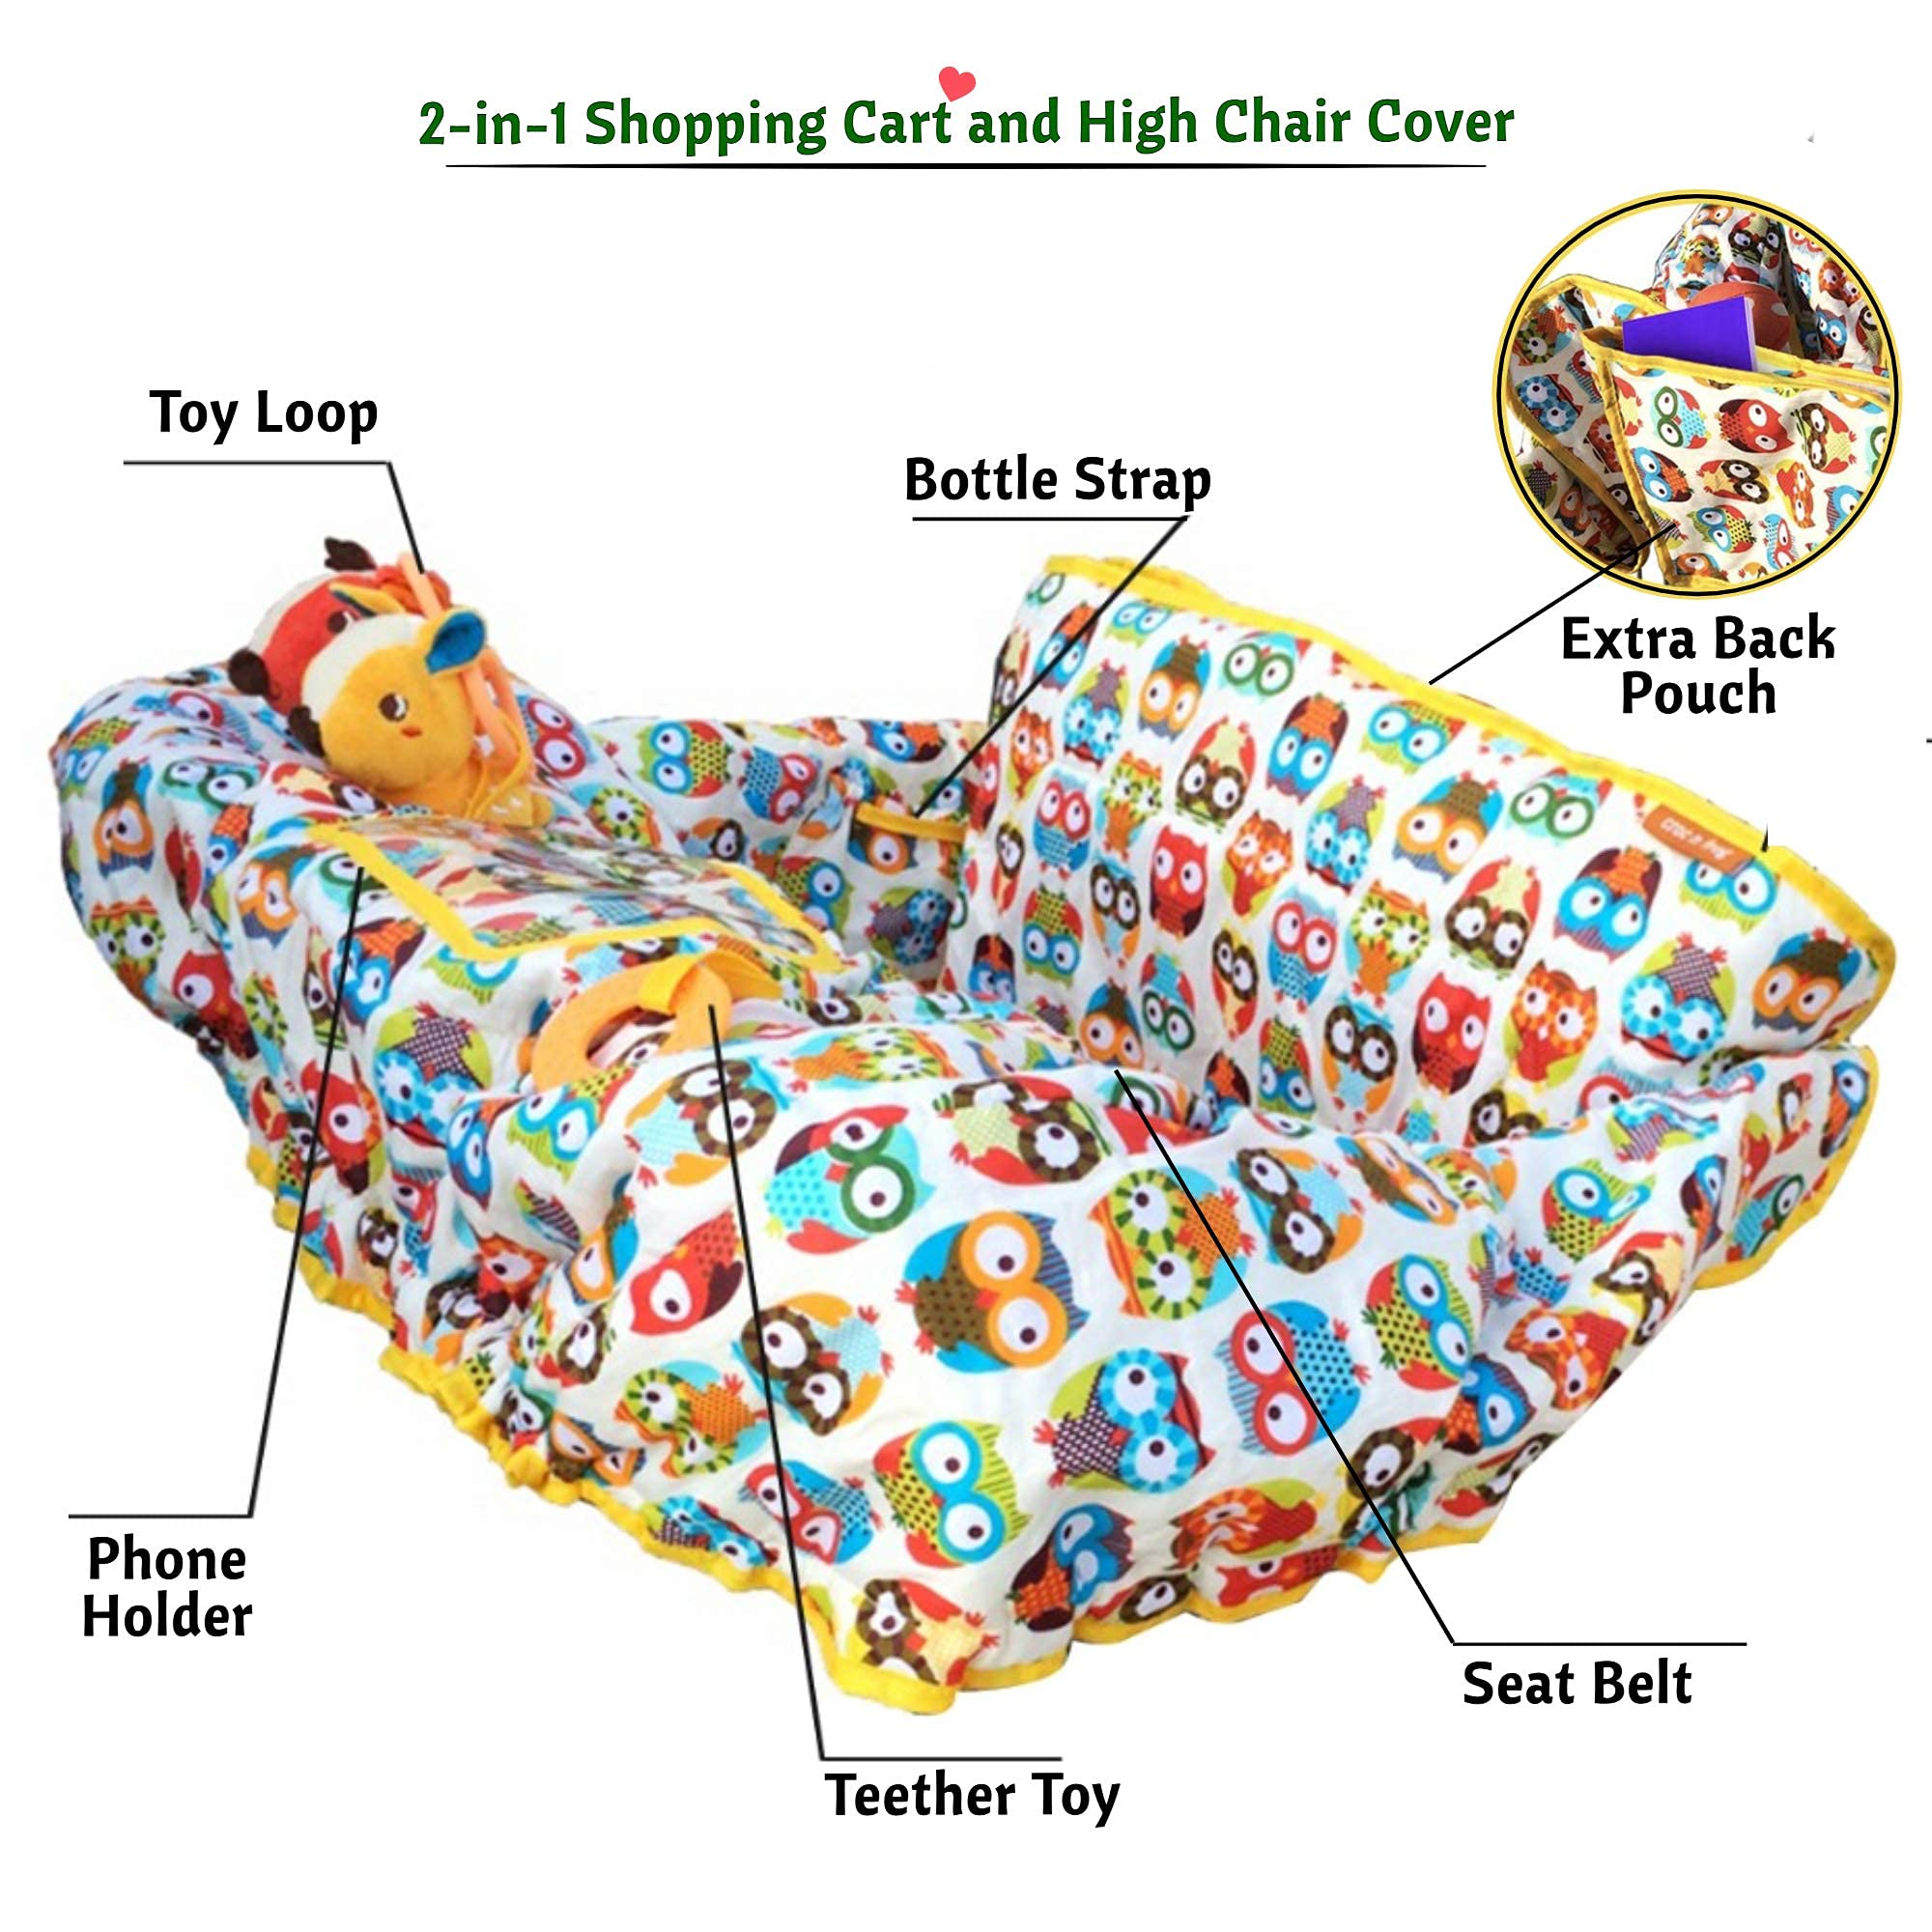 Premium Shopping Cart Cover for Baby - Universal Fit - Comfort, Safety Hygiene for Your Baby During Shopping - Ideal for Grocery Carts and High Chairs - Machine Washable - Perfect Baby Shower Gift!